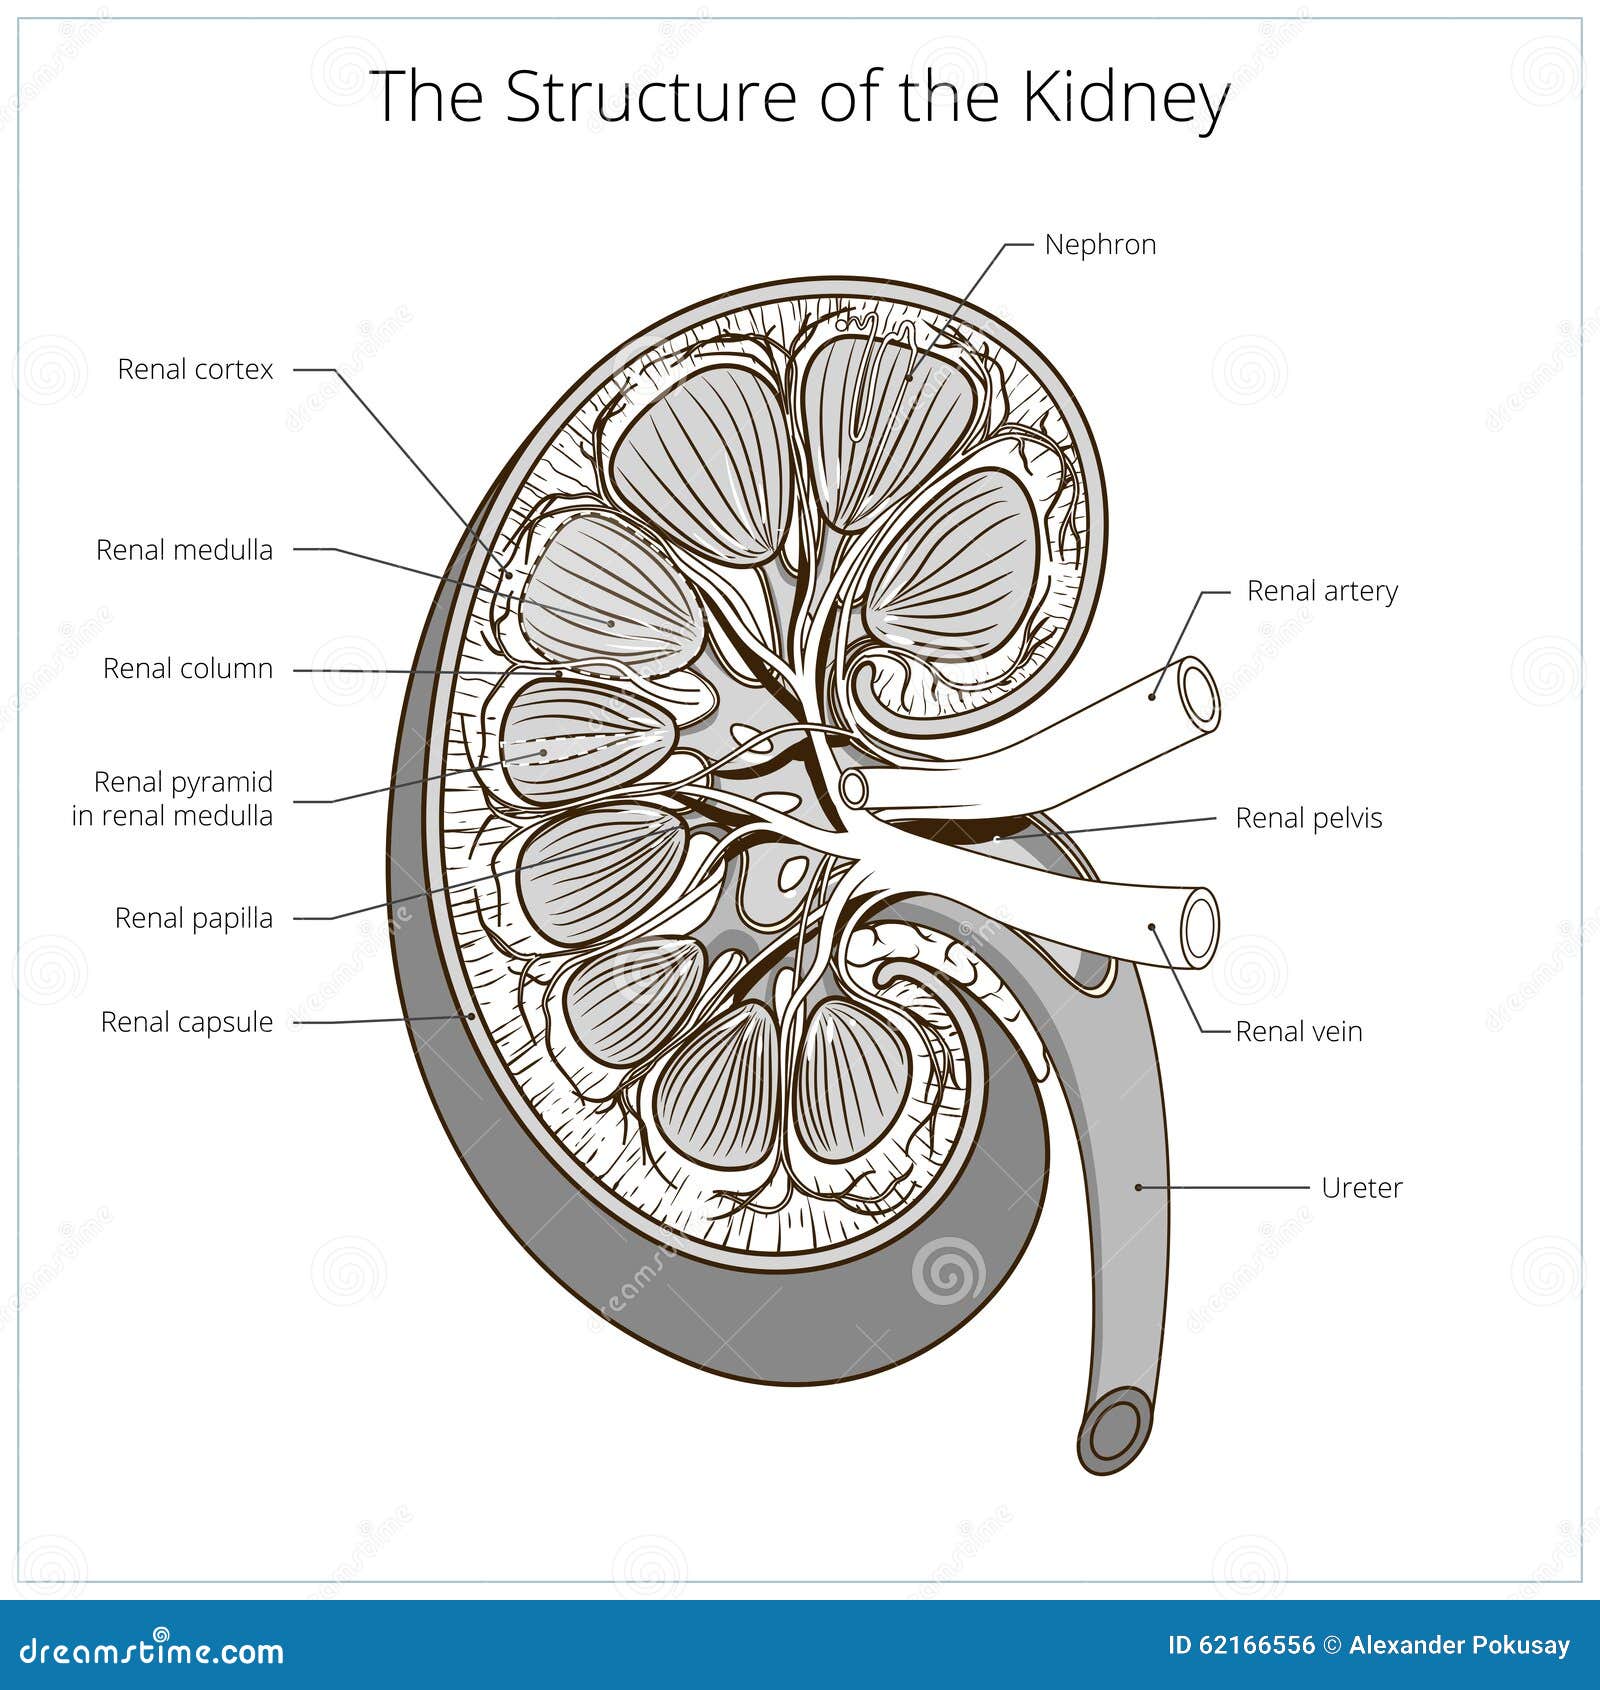 Draw a well labelled diagram of LS of the human kidney